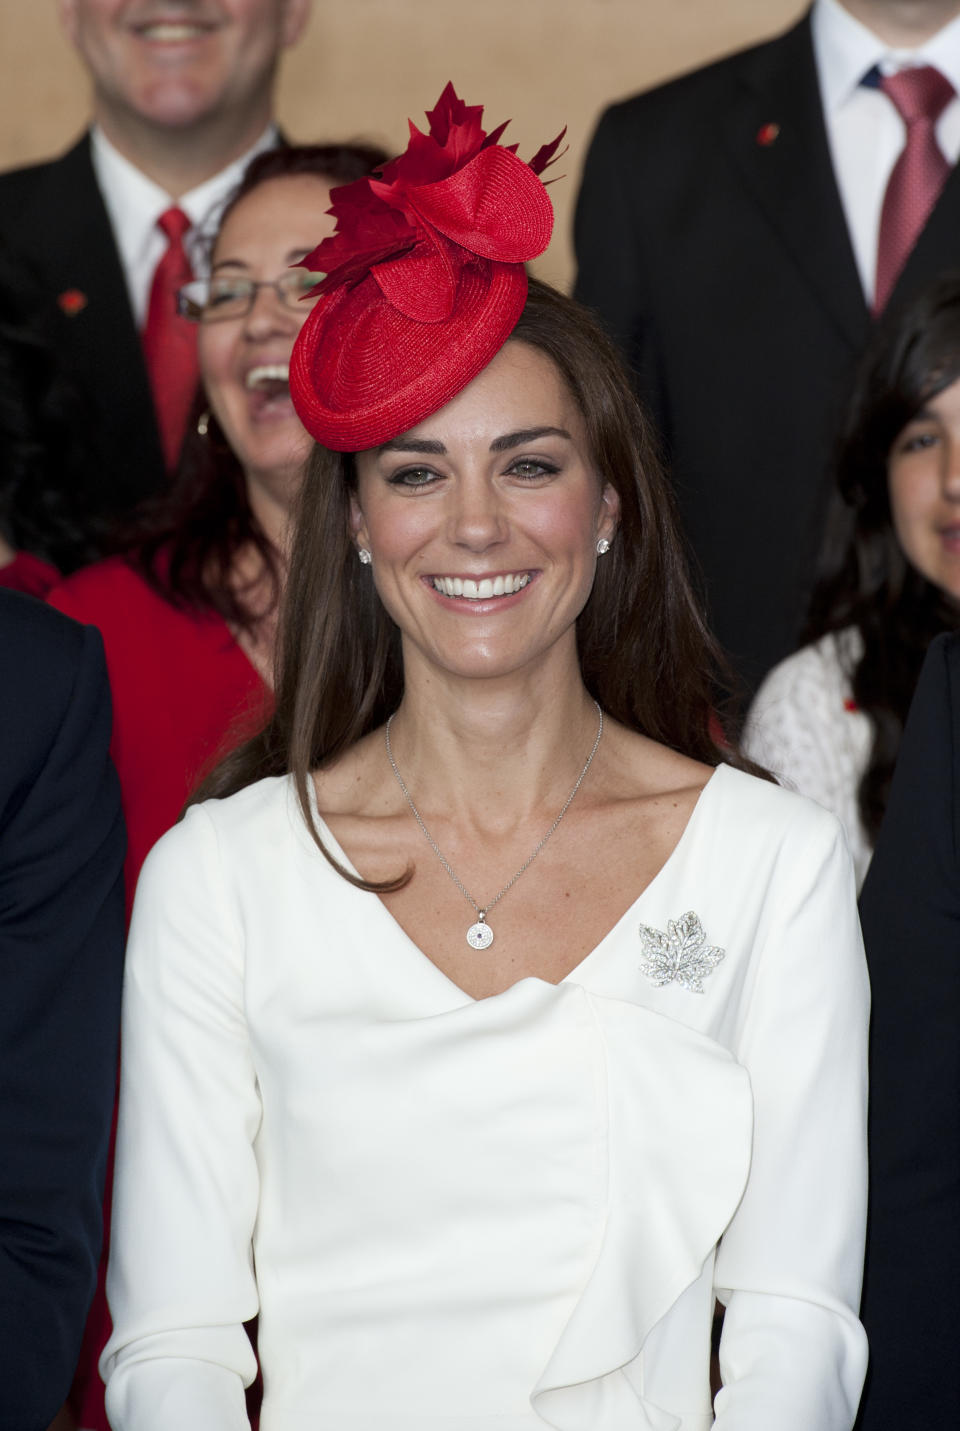 Kate was pictured wearing diamonds including this maple leaf broach, while visiting Canada in 2011. Photo: Getty